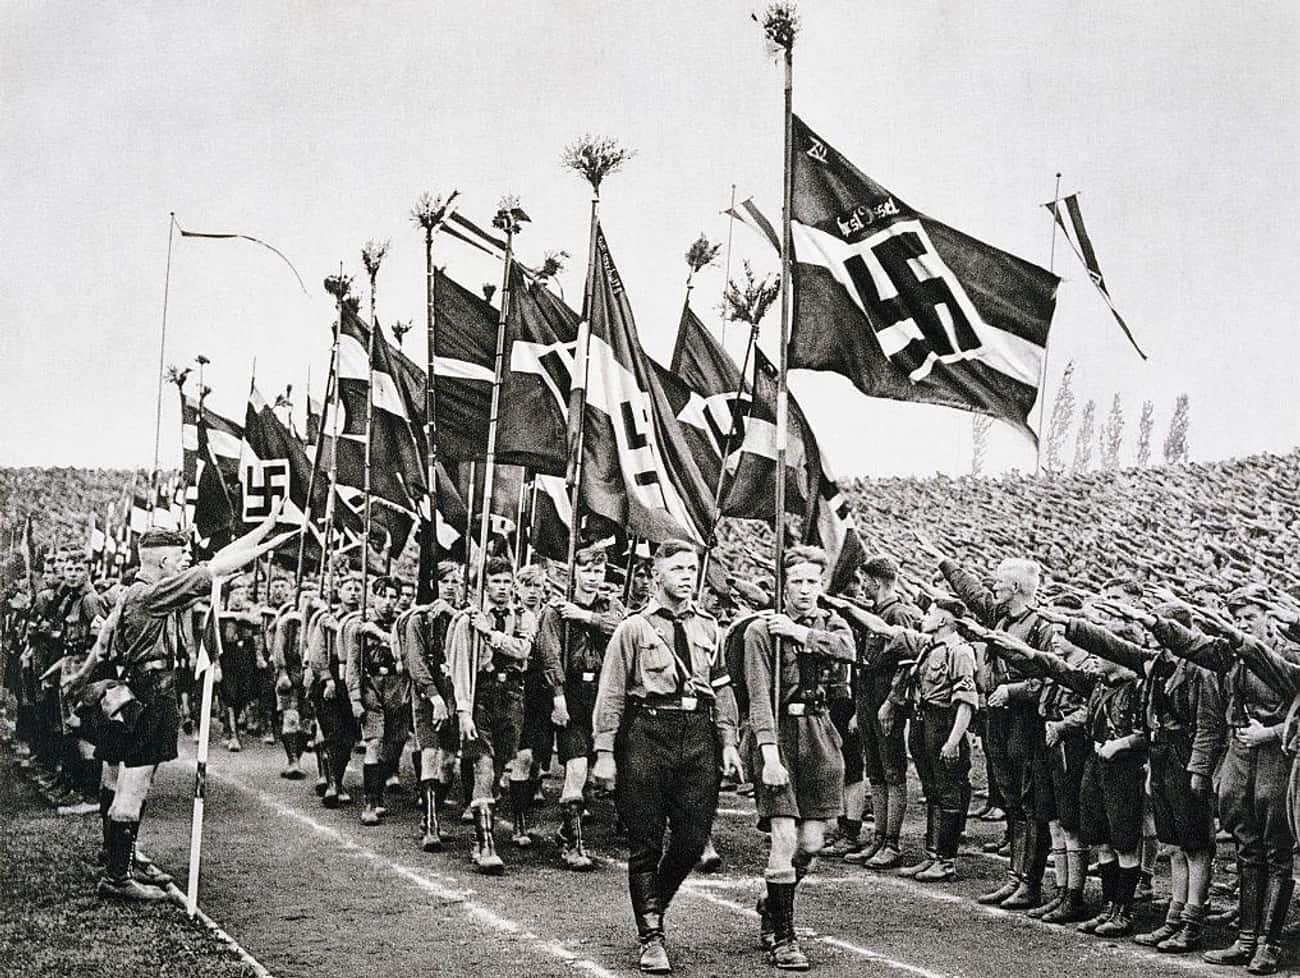 The Hitlerjugend (Hitler Youth) Was The Youth Organization Of The Nazi Party